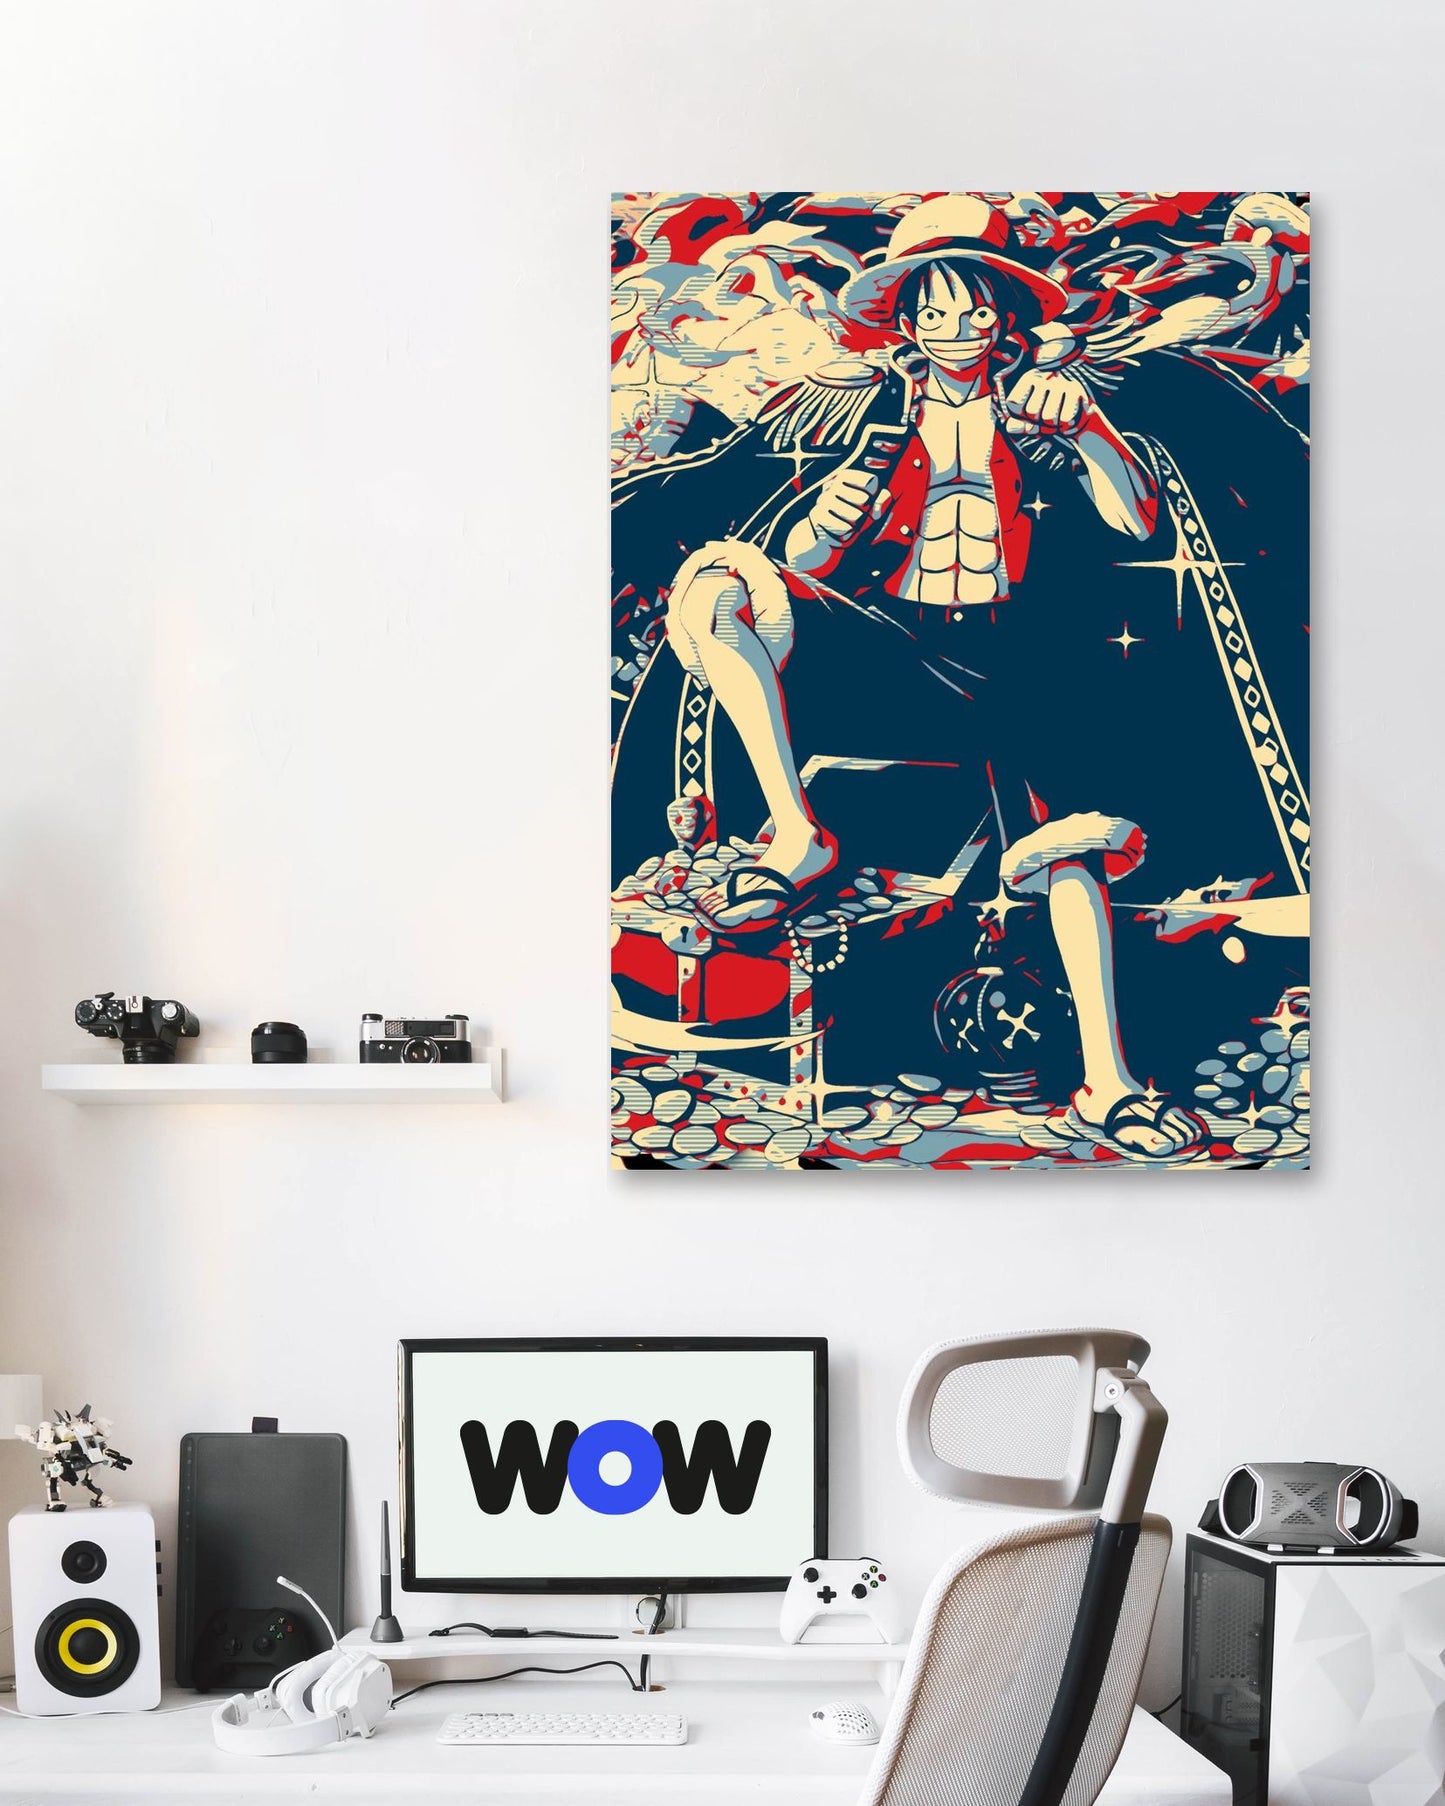 Luffy the pirate - @WoWLovers